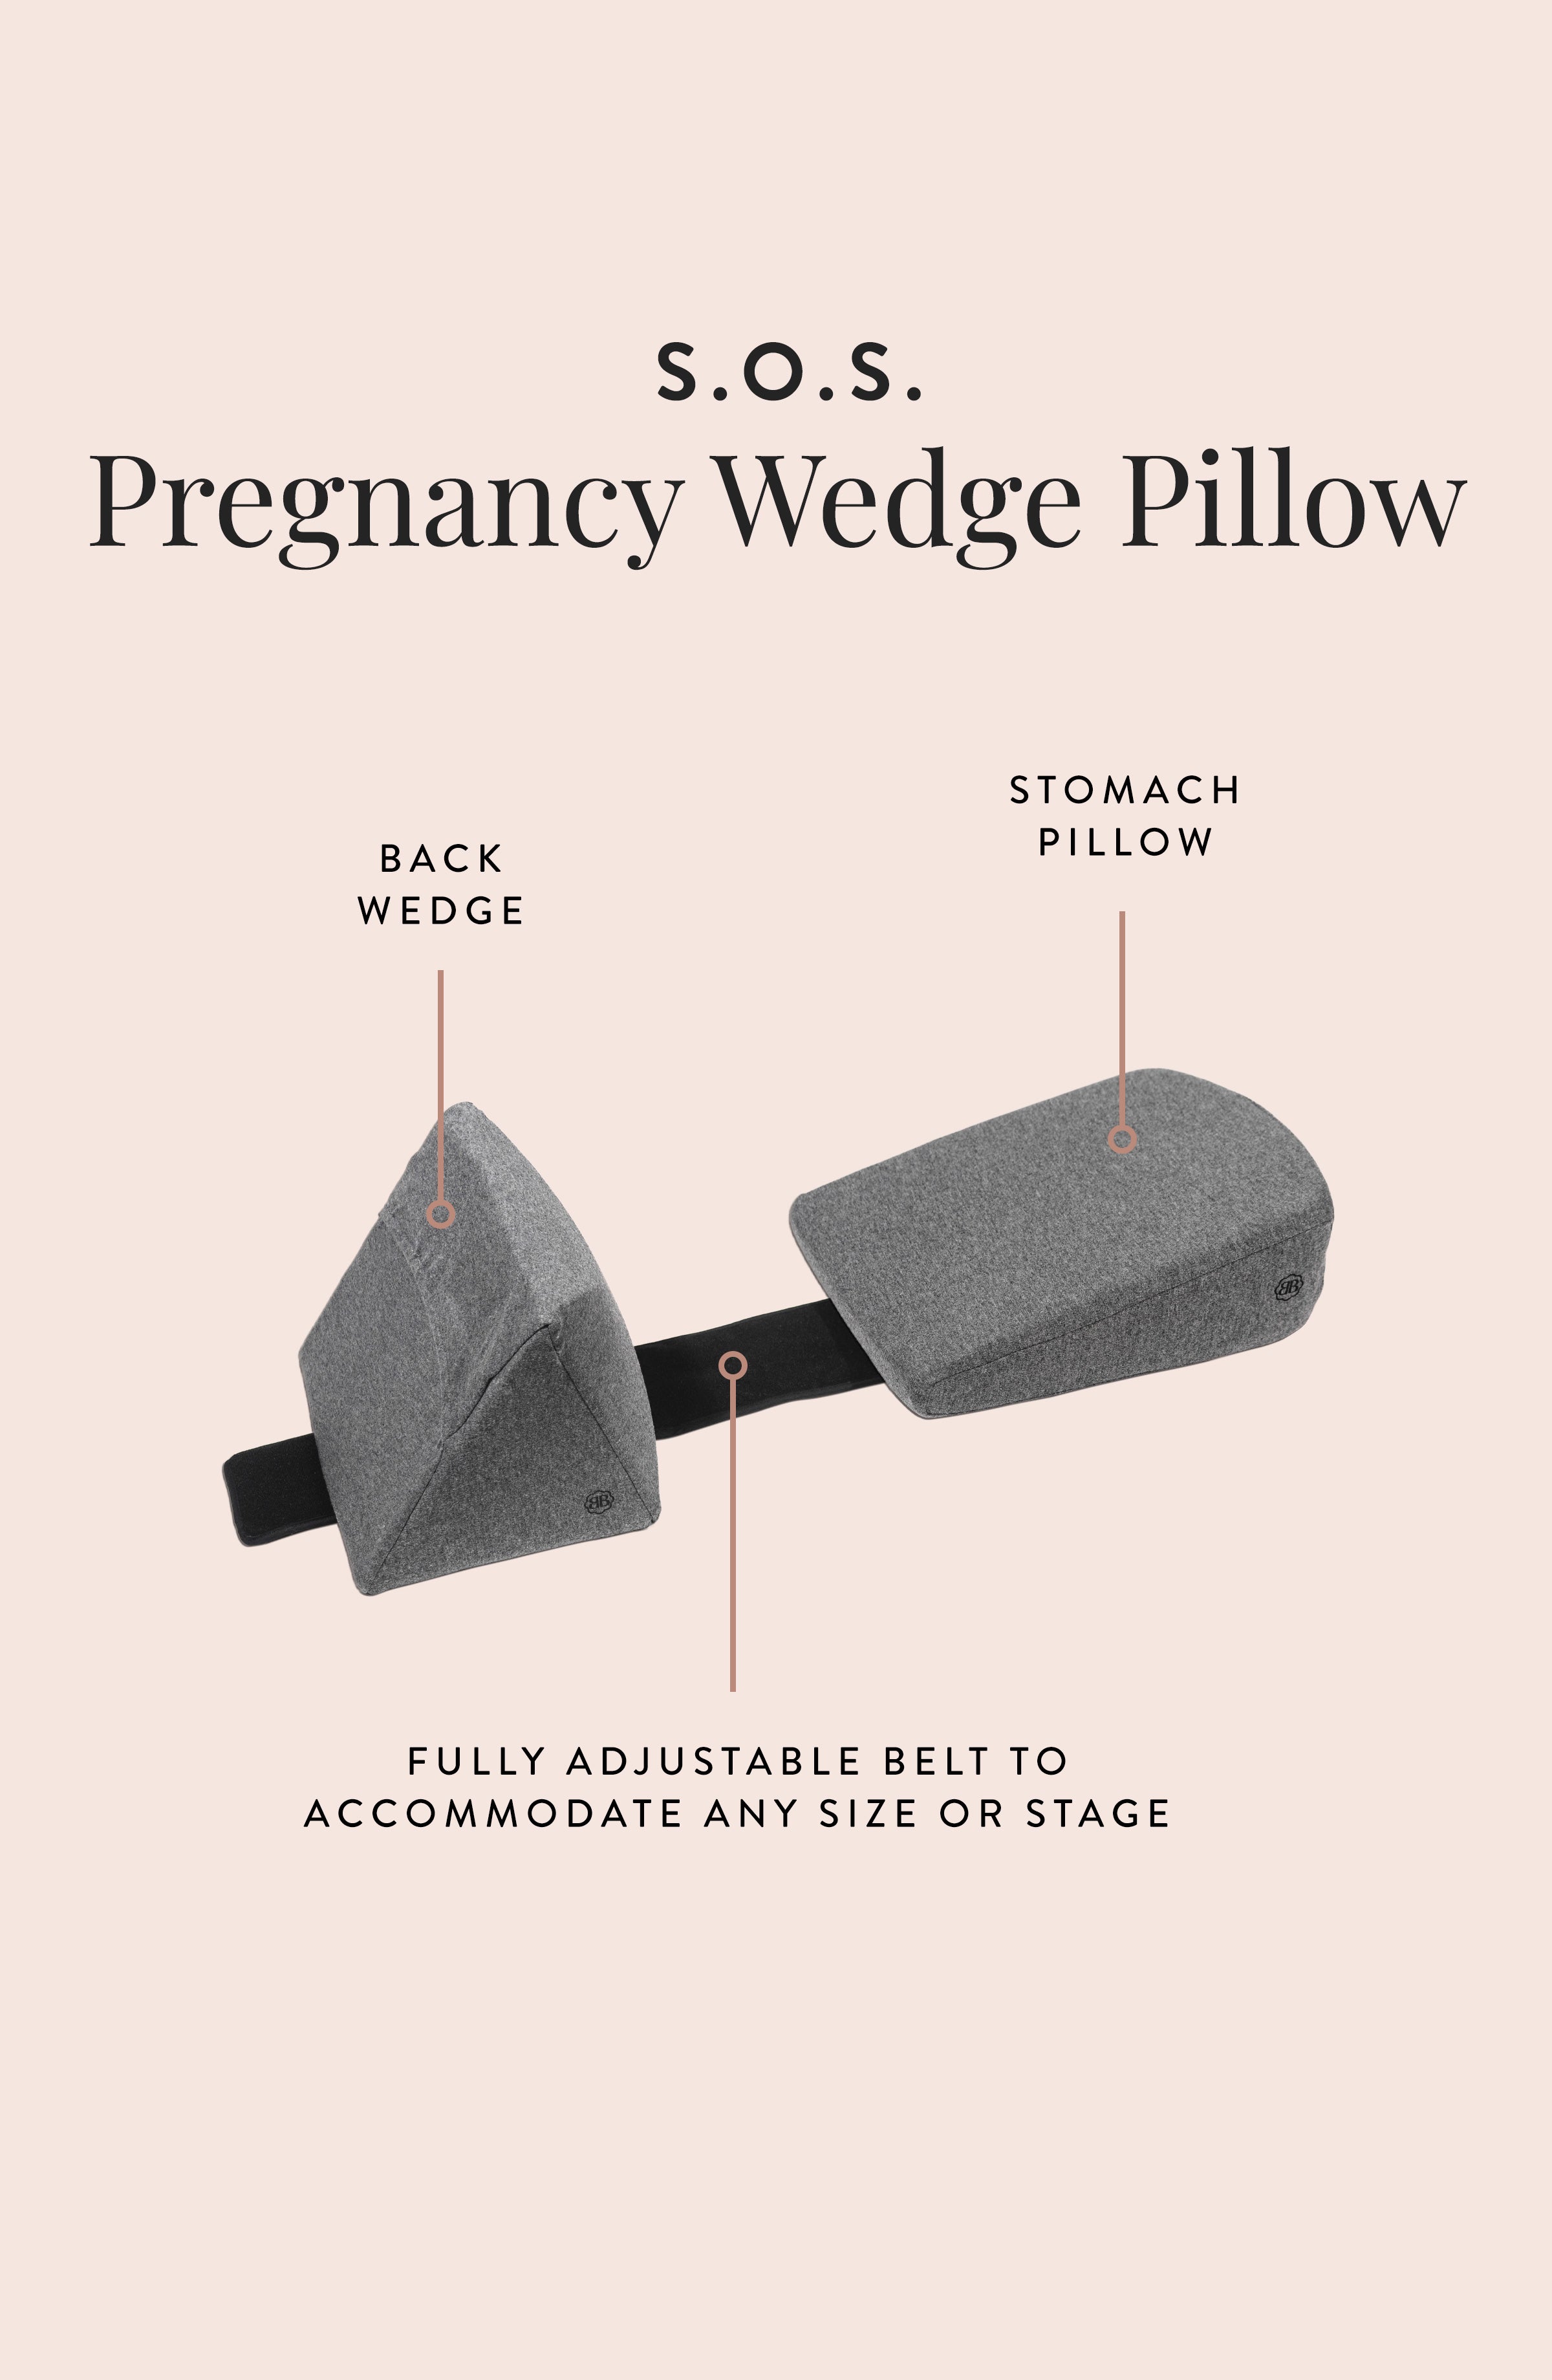 Pregnancy Pillow Buying Guide: Expert Tips And Advice